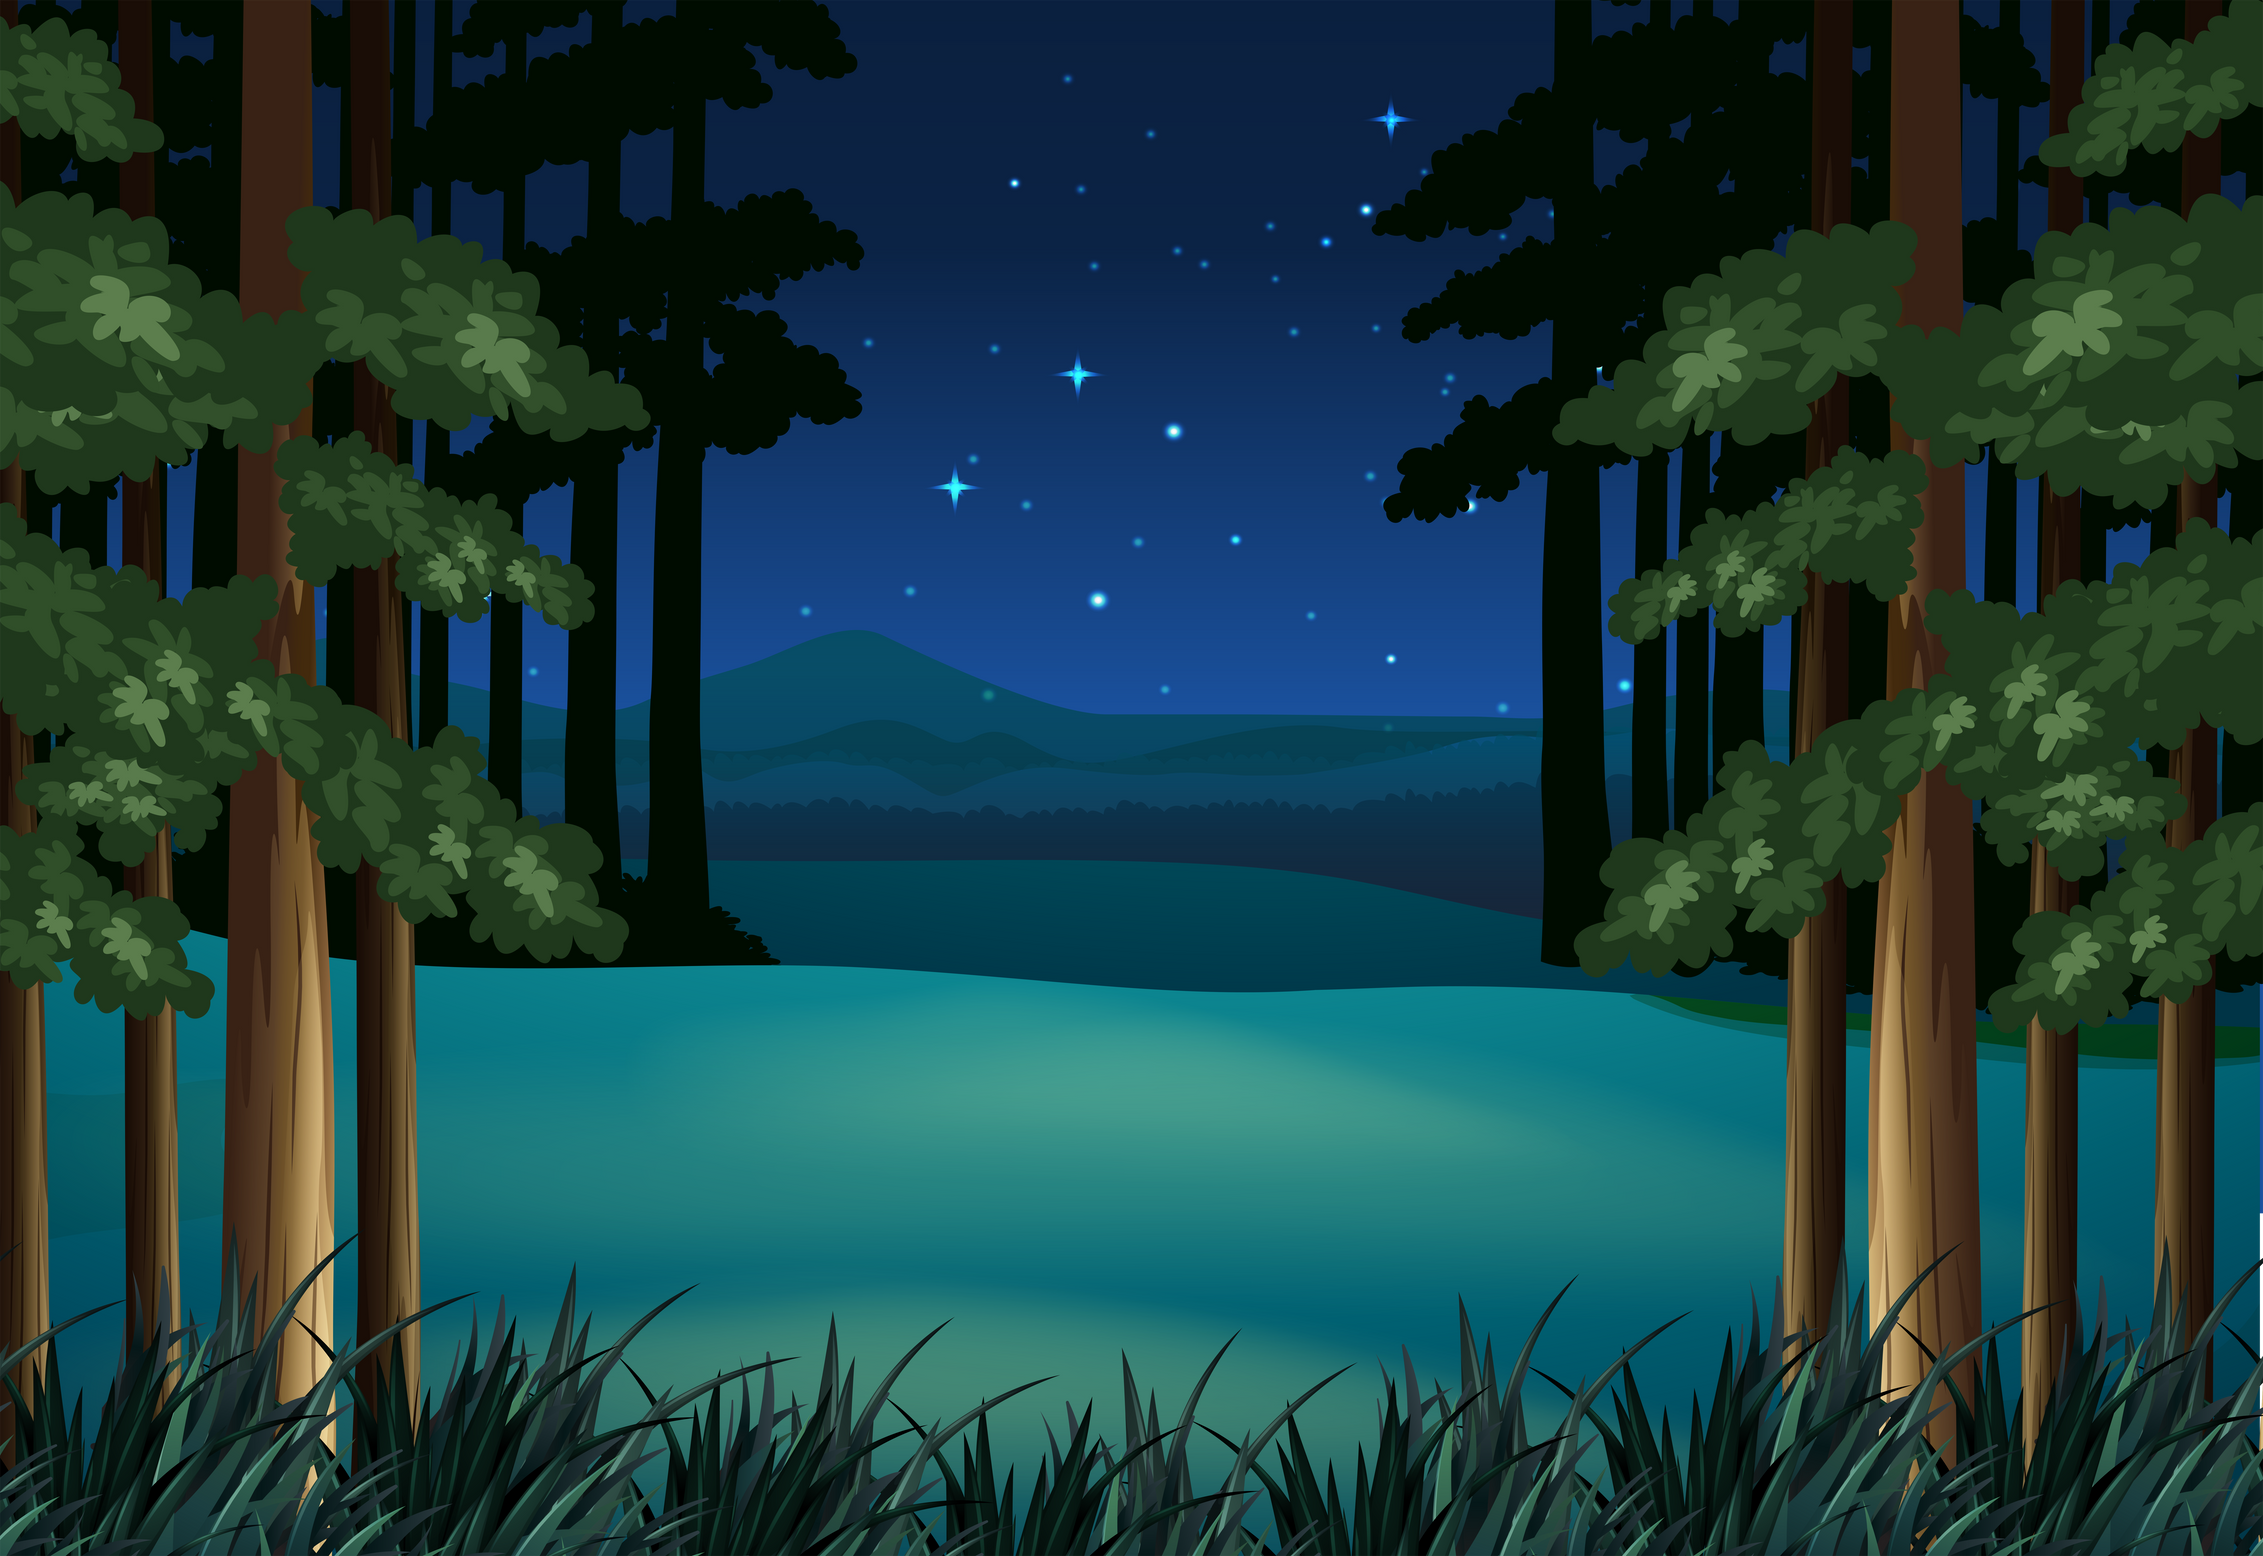 Forest scene at night with stars